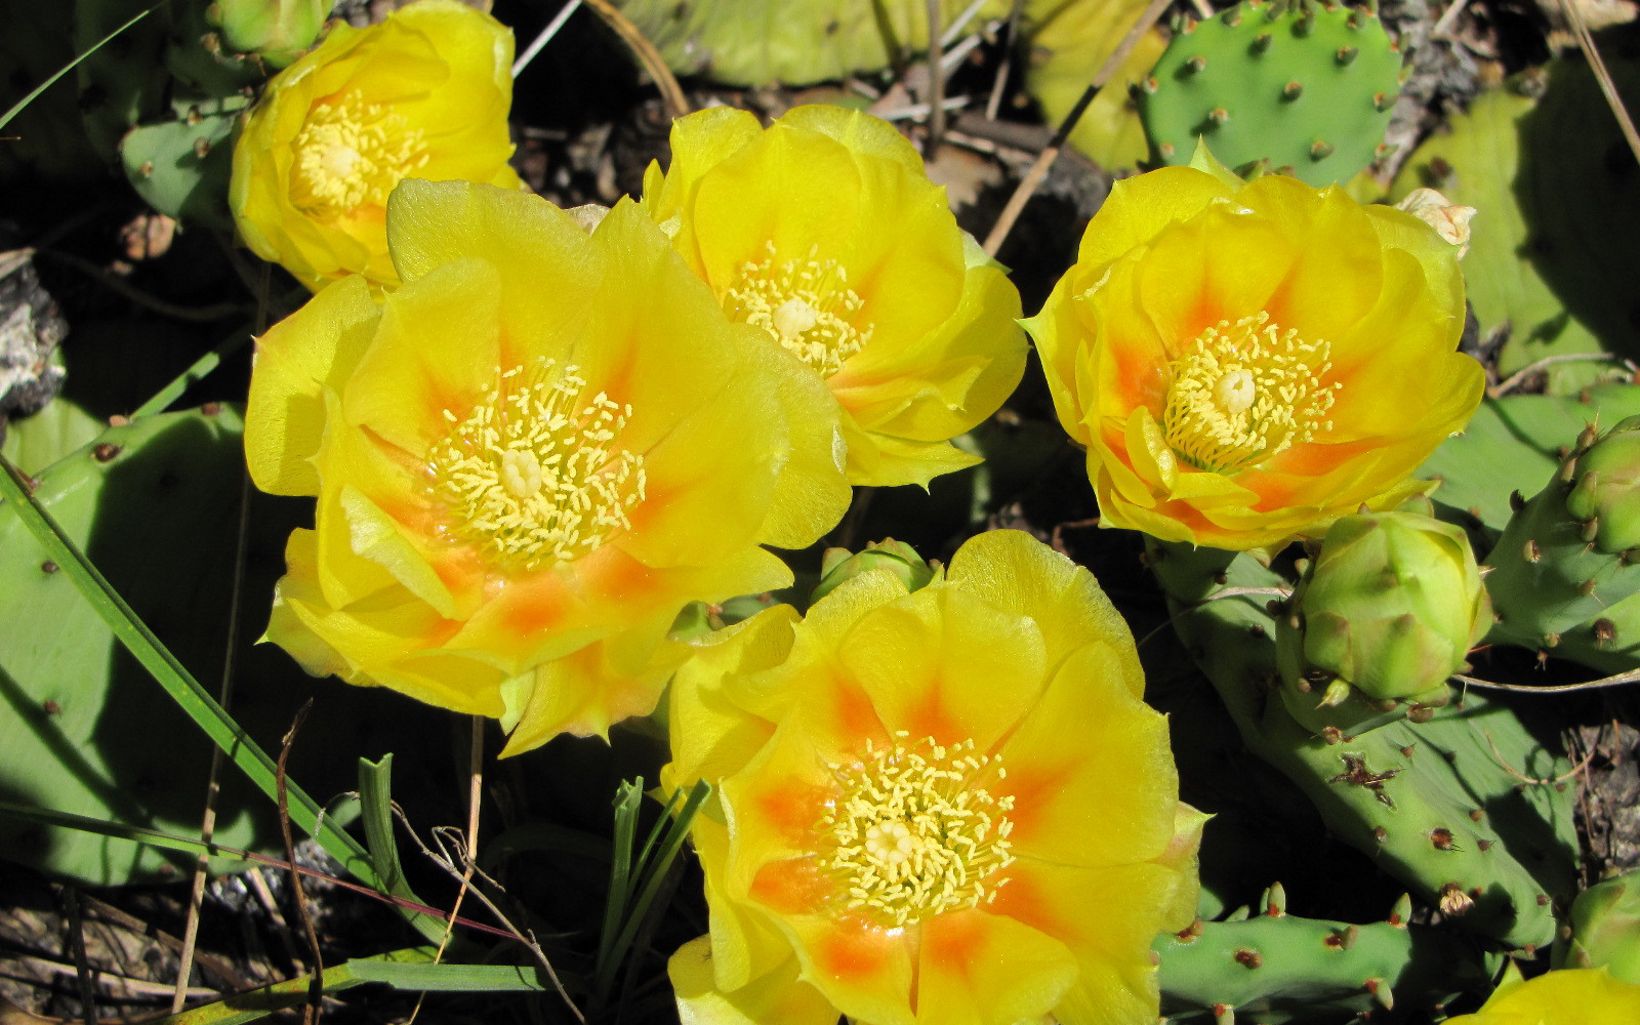 Yellow flowers from the Prickly Pear Cactus.